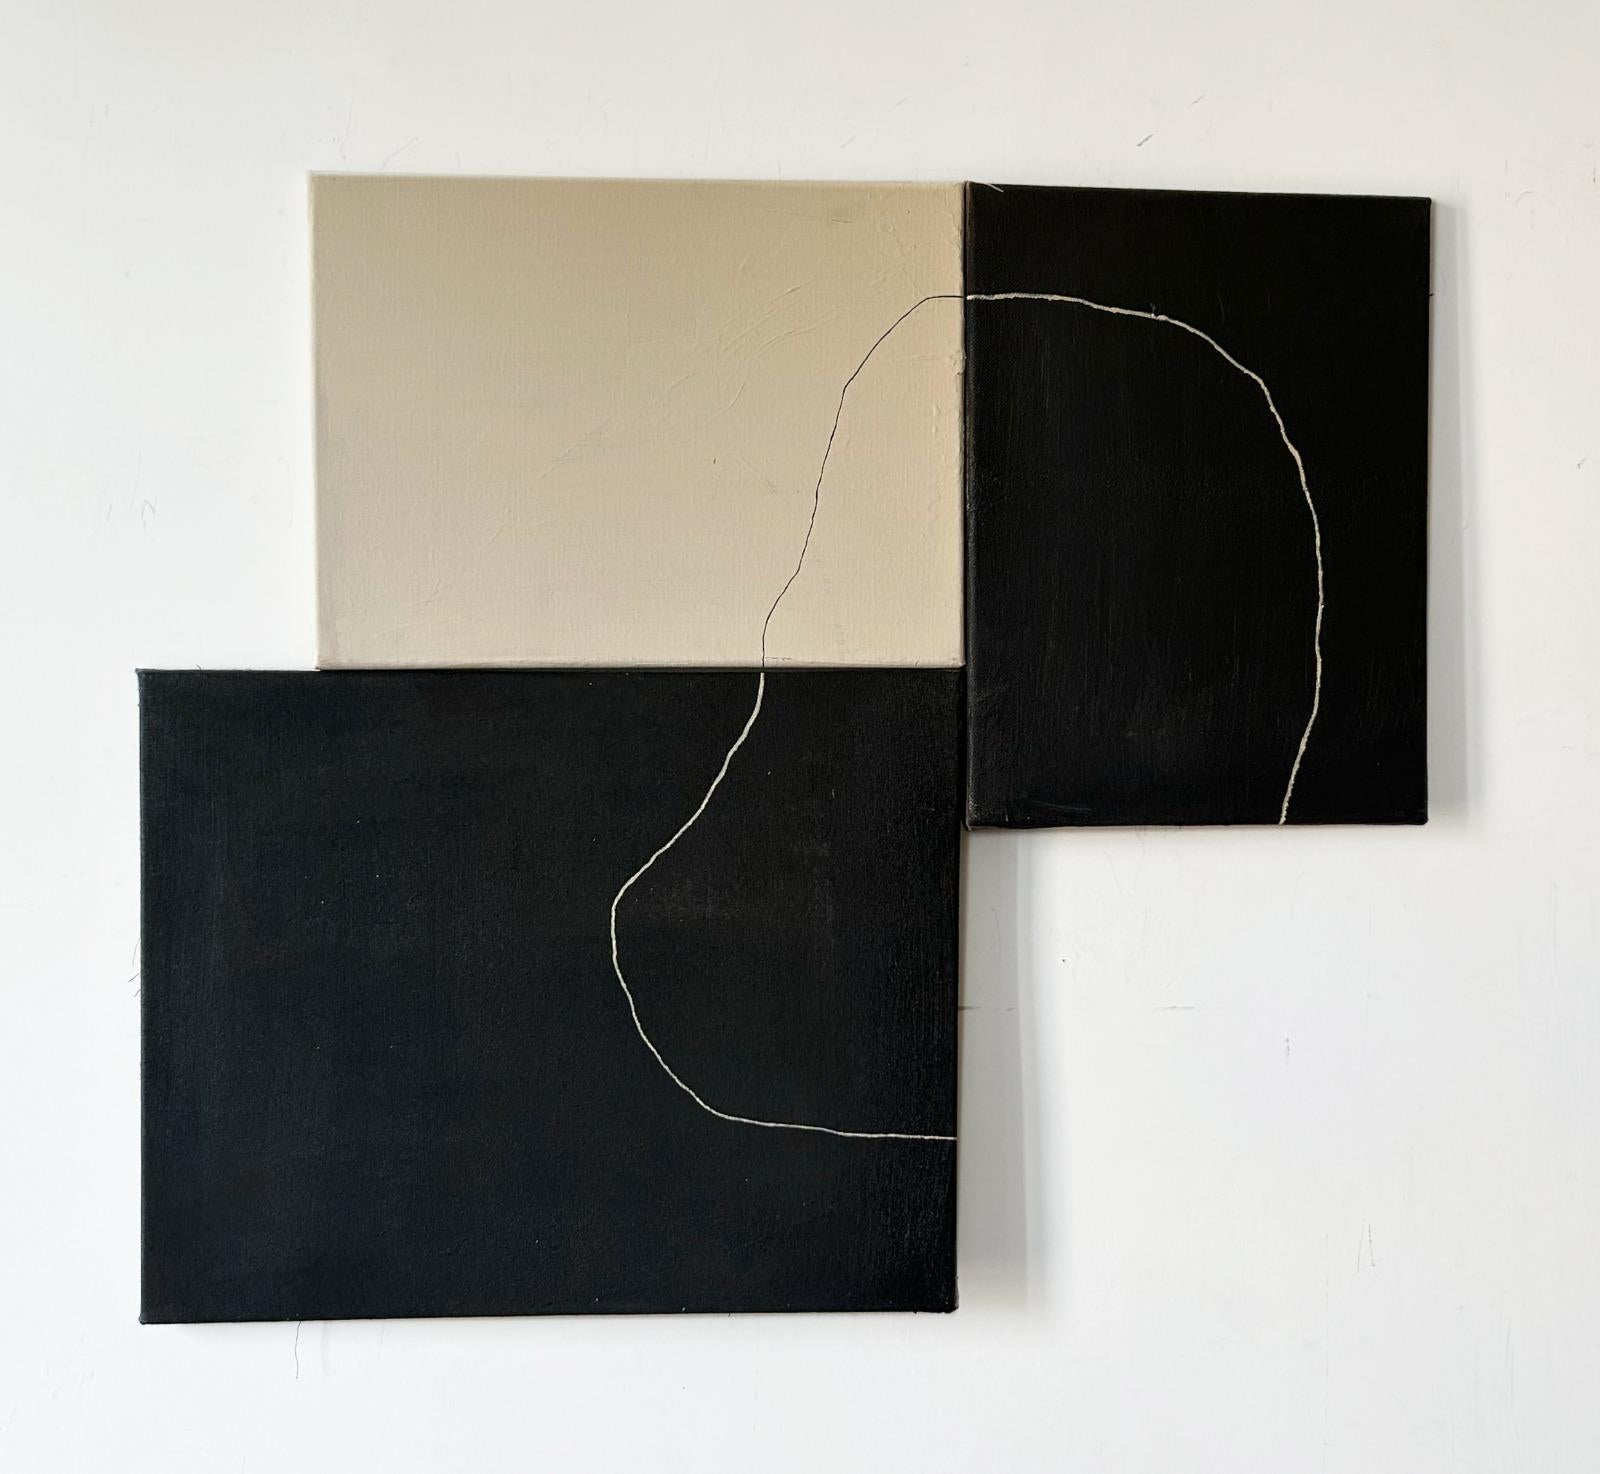 ABSTRACT. Triptych Black white painting by Spanish Artist minimal Untitled 2023